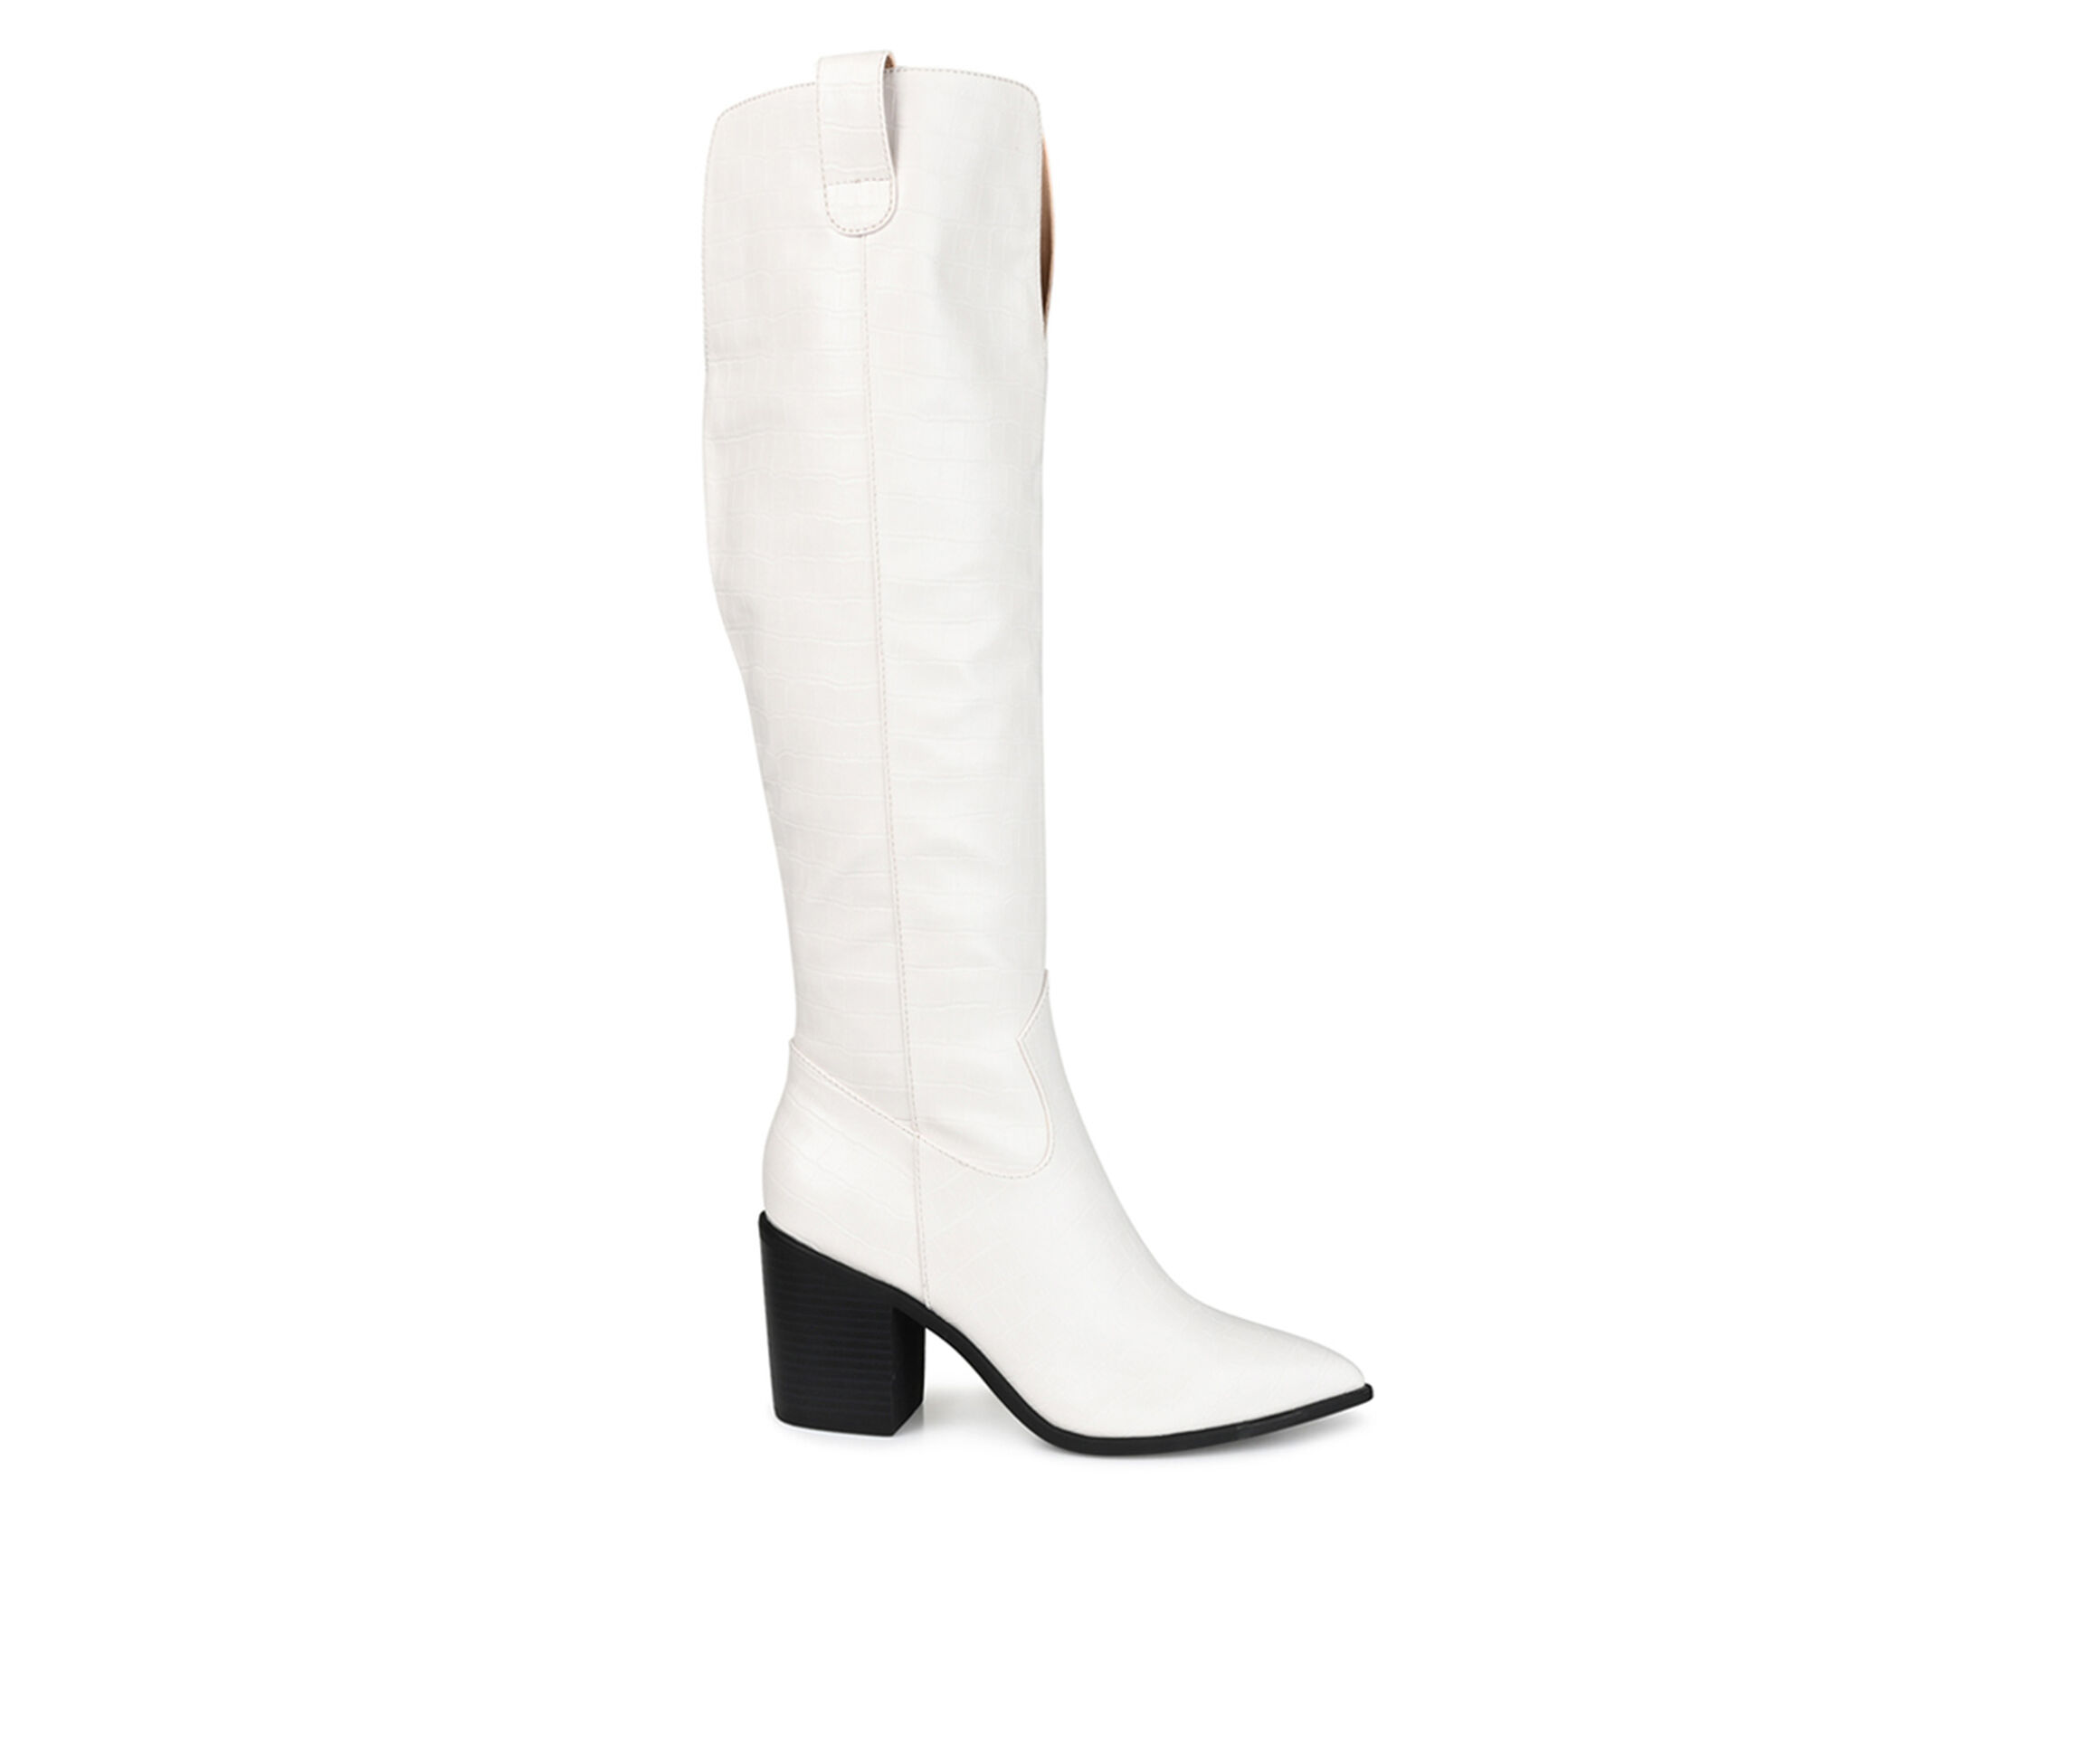 Women’s Journee Collection Therese Wide Calf Over-The-Knee Boot in Bone Size 6.5 Medium